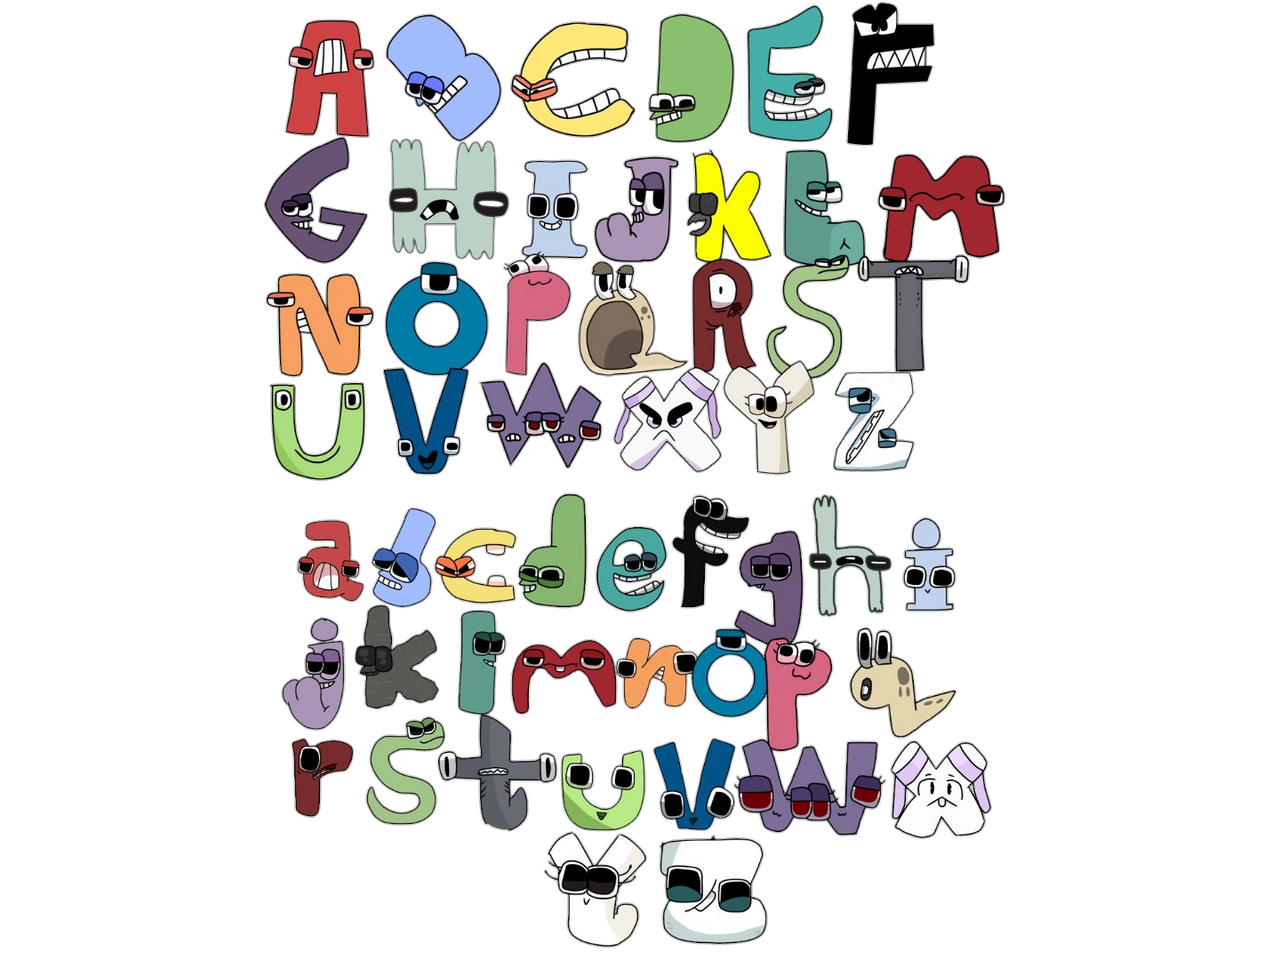 Repeqecatian Alphabet Lore Fanmade By Thebobby65 by